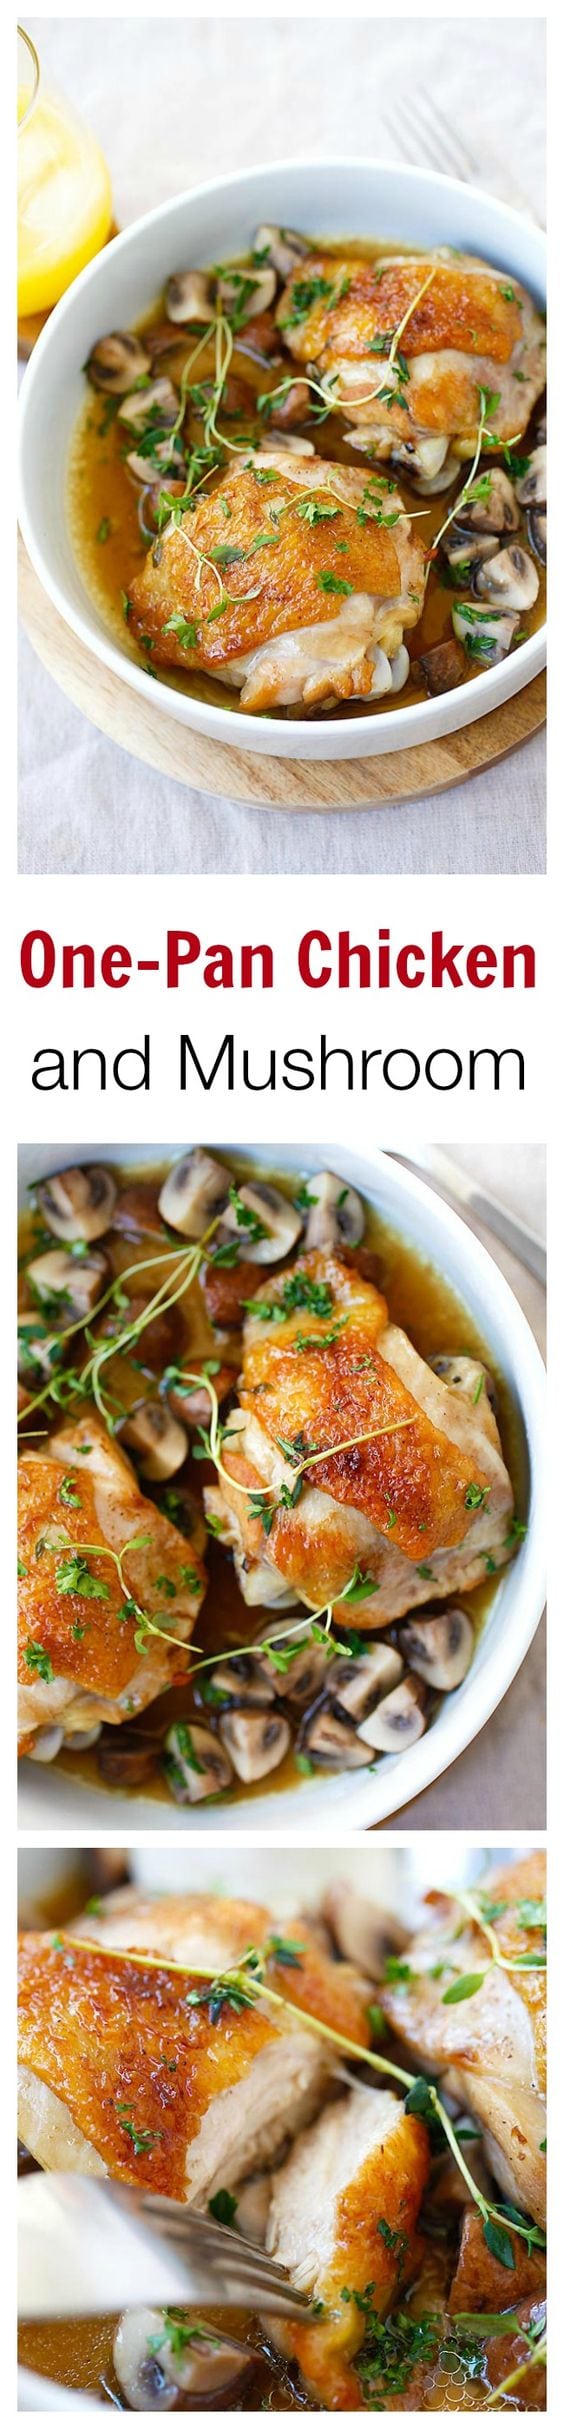 Chicken with Sauteed Mushroom – one-pan chicken with mushroom, all cooked in a pan with wine and chicken broth. So easy, delicious, and budget friendly | rasamalaysia.com